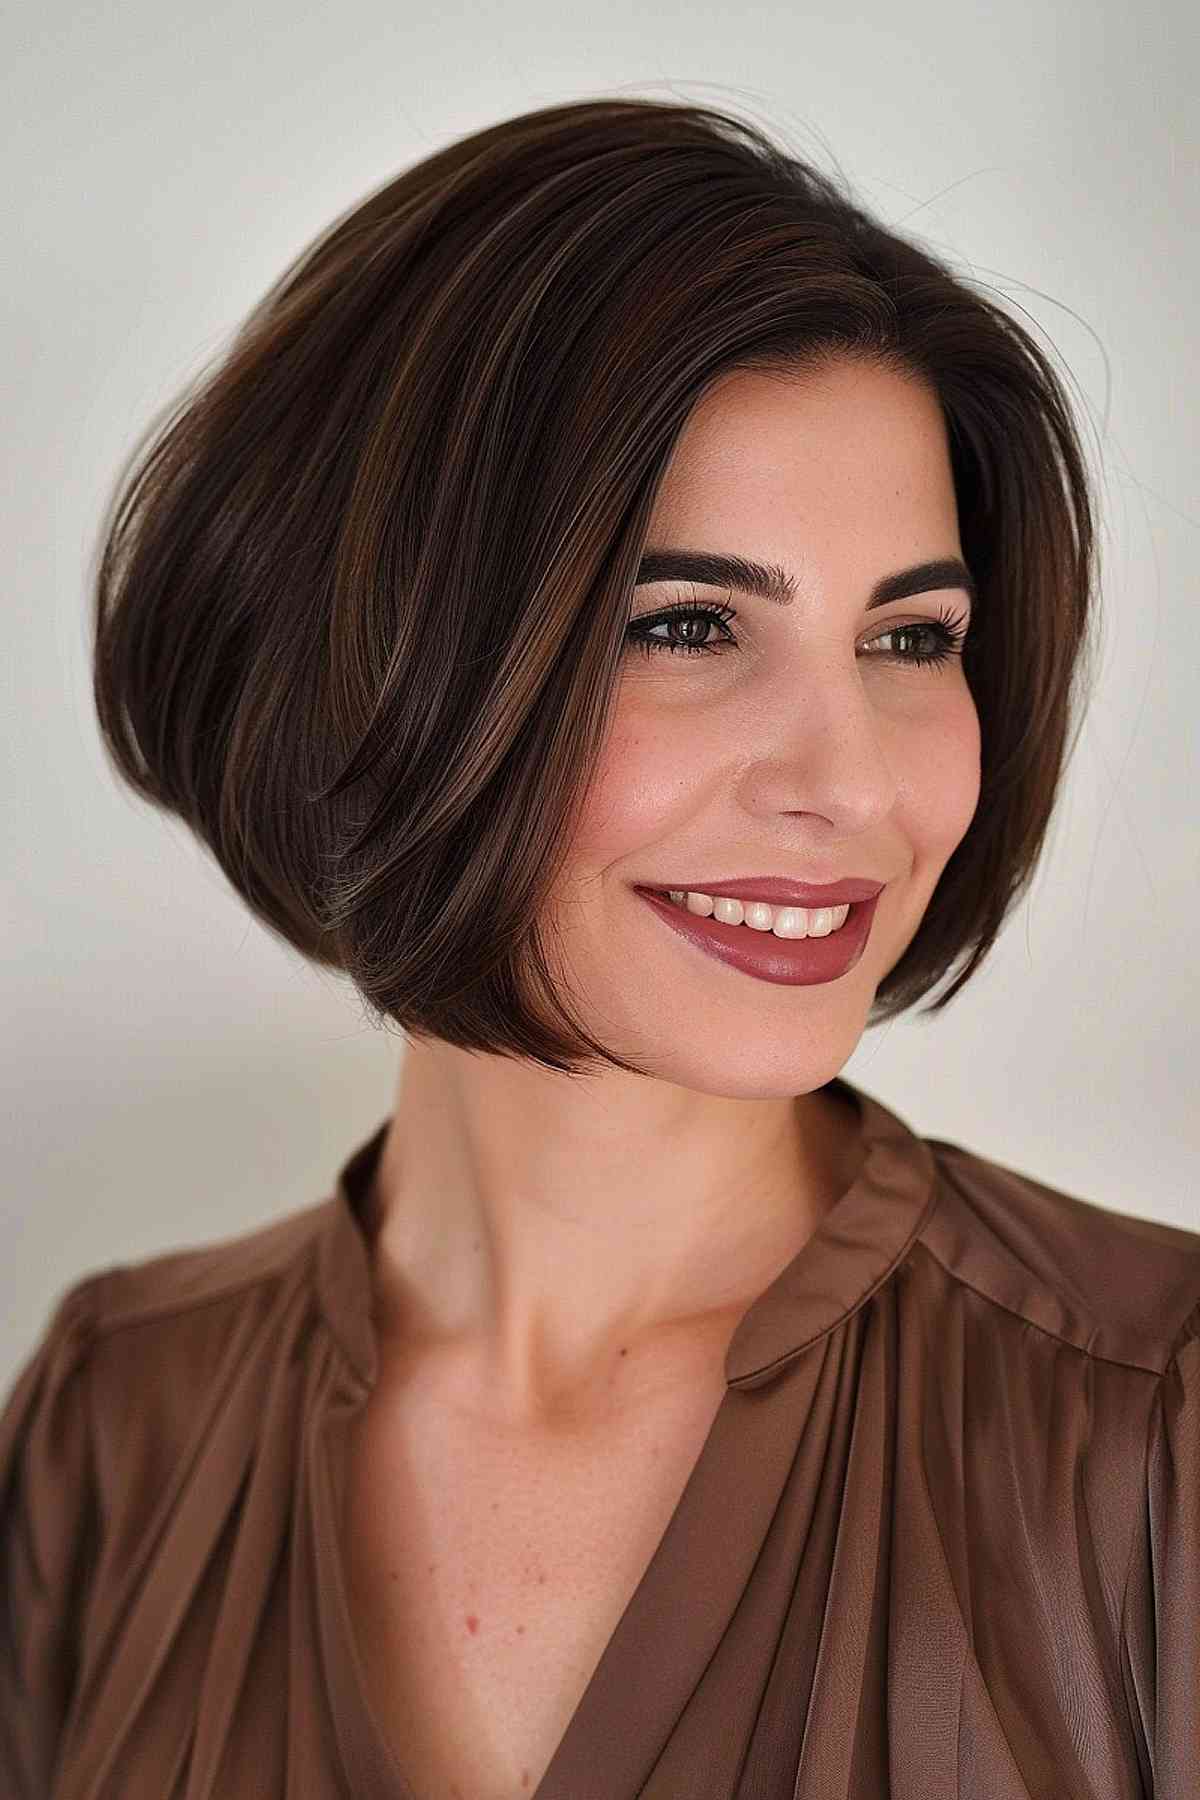 Sleek and straight Chanel bob cut at chin-length for a refined appearance.